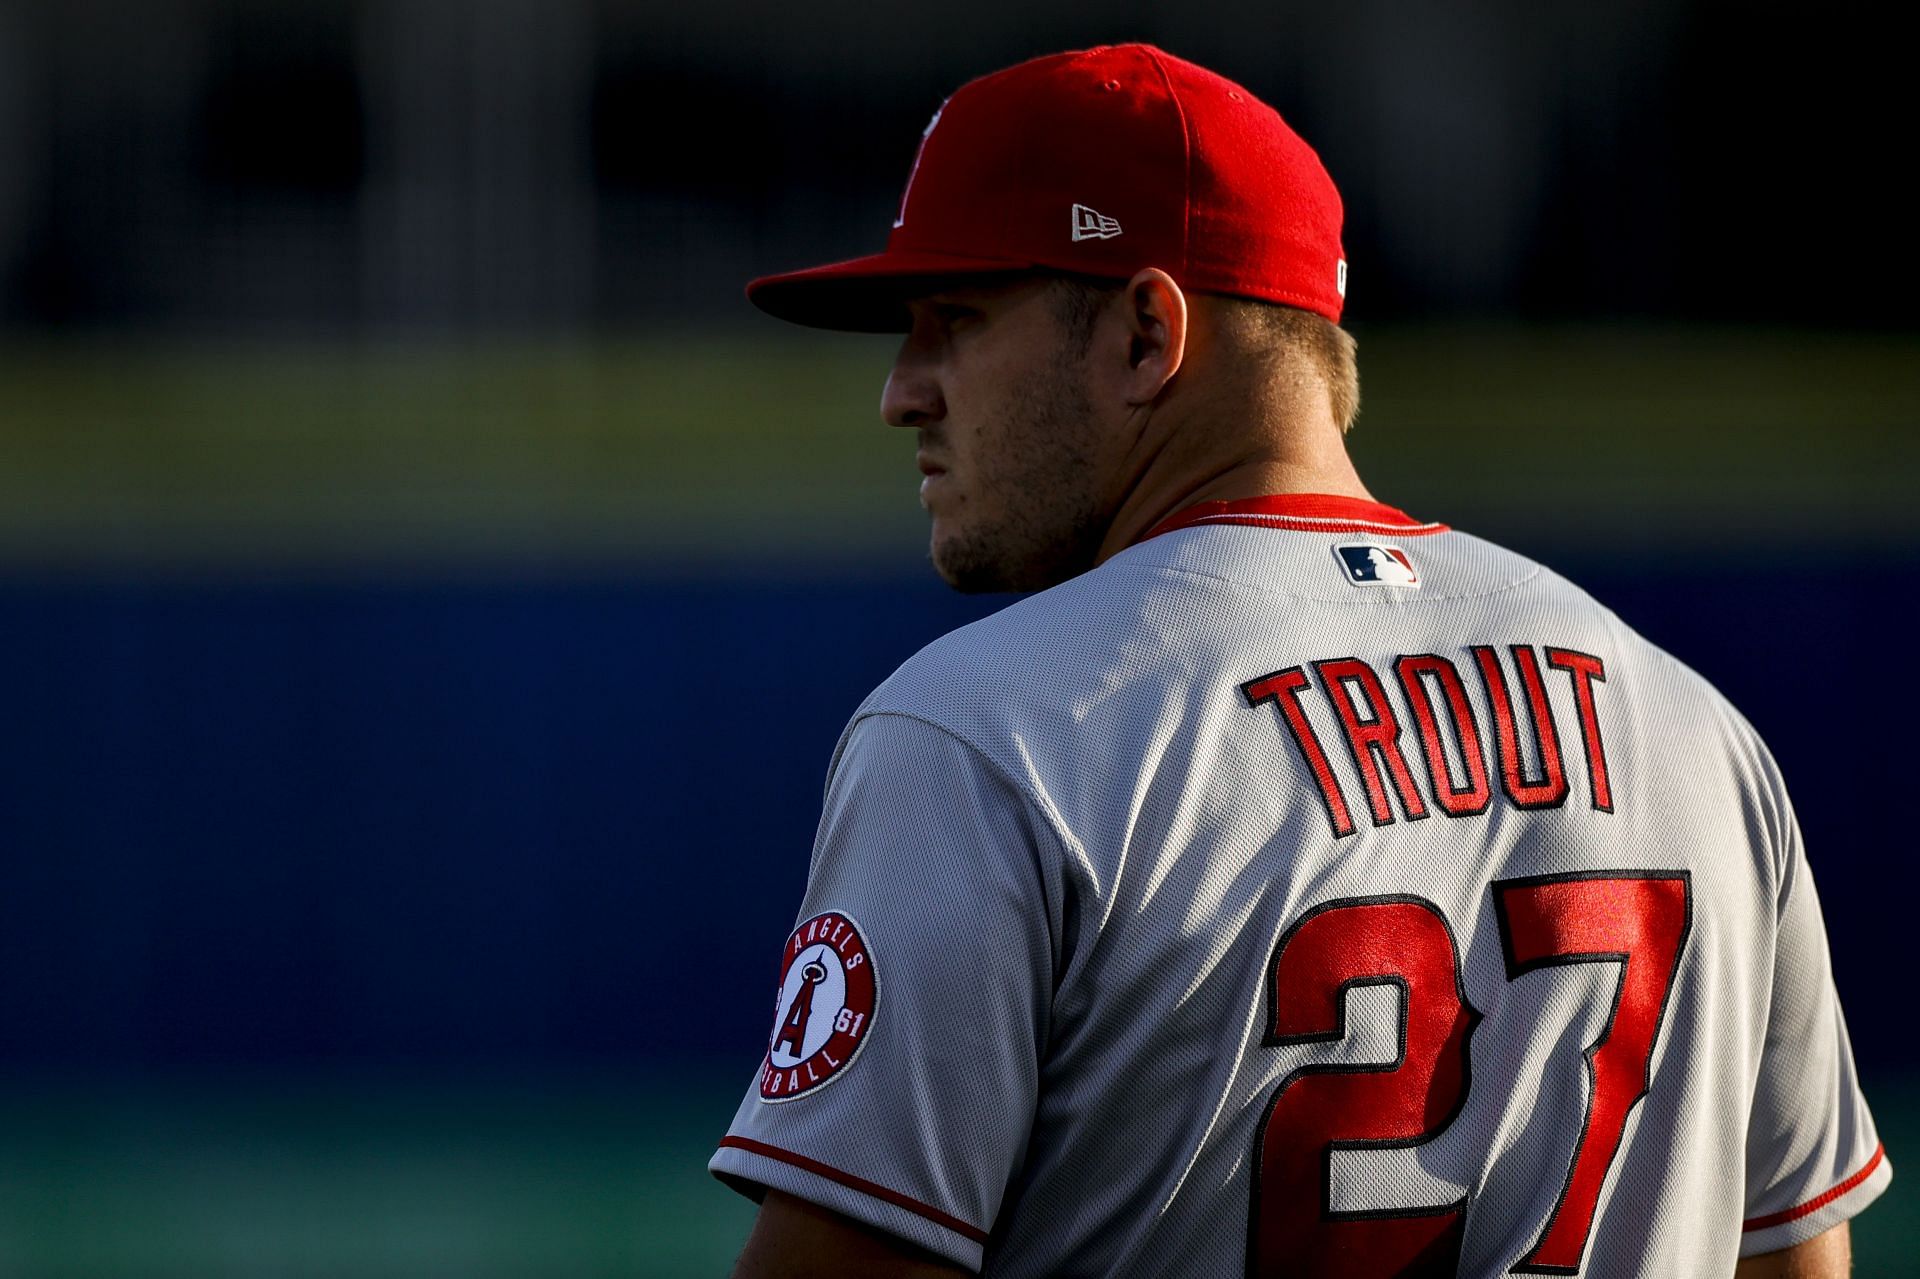 Los Angeles Angels star Mike Trout